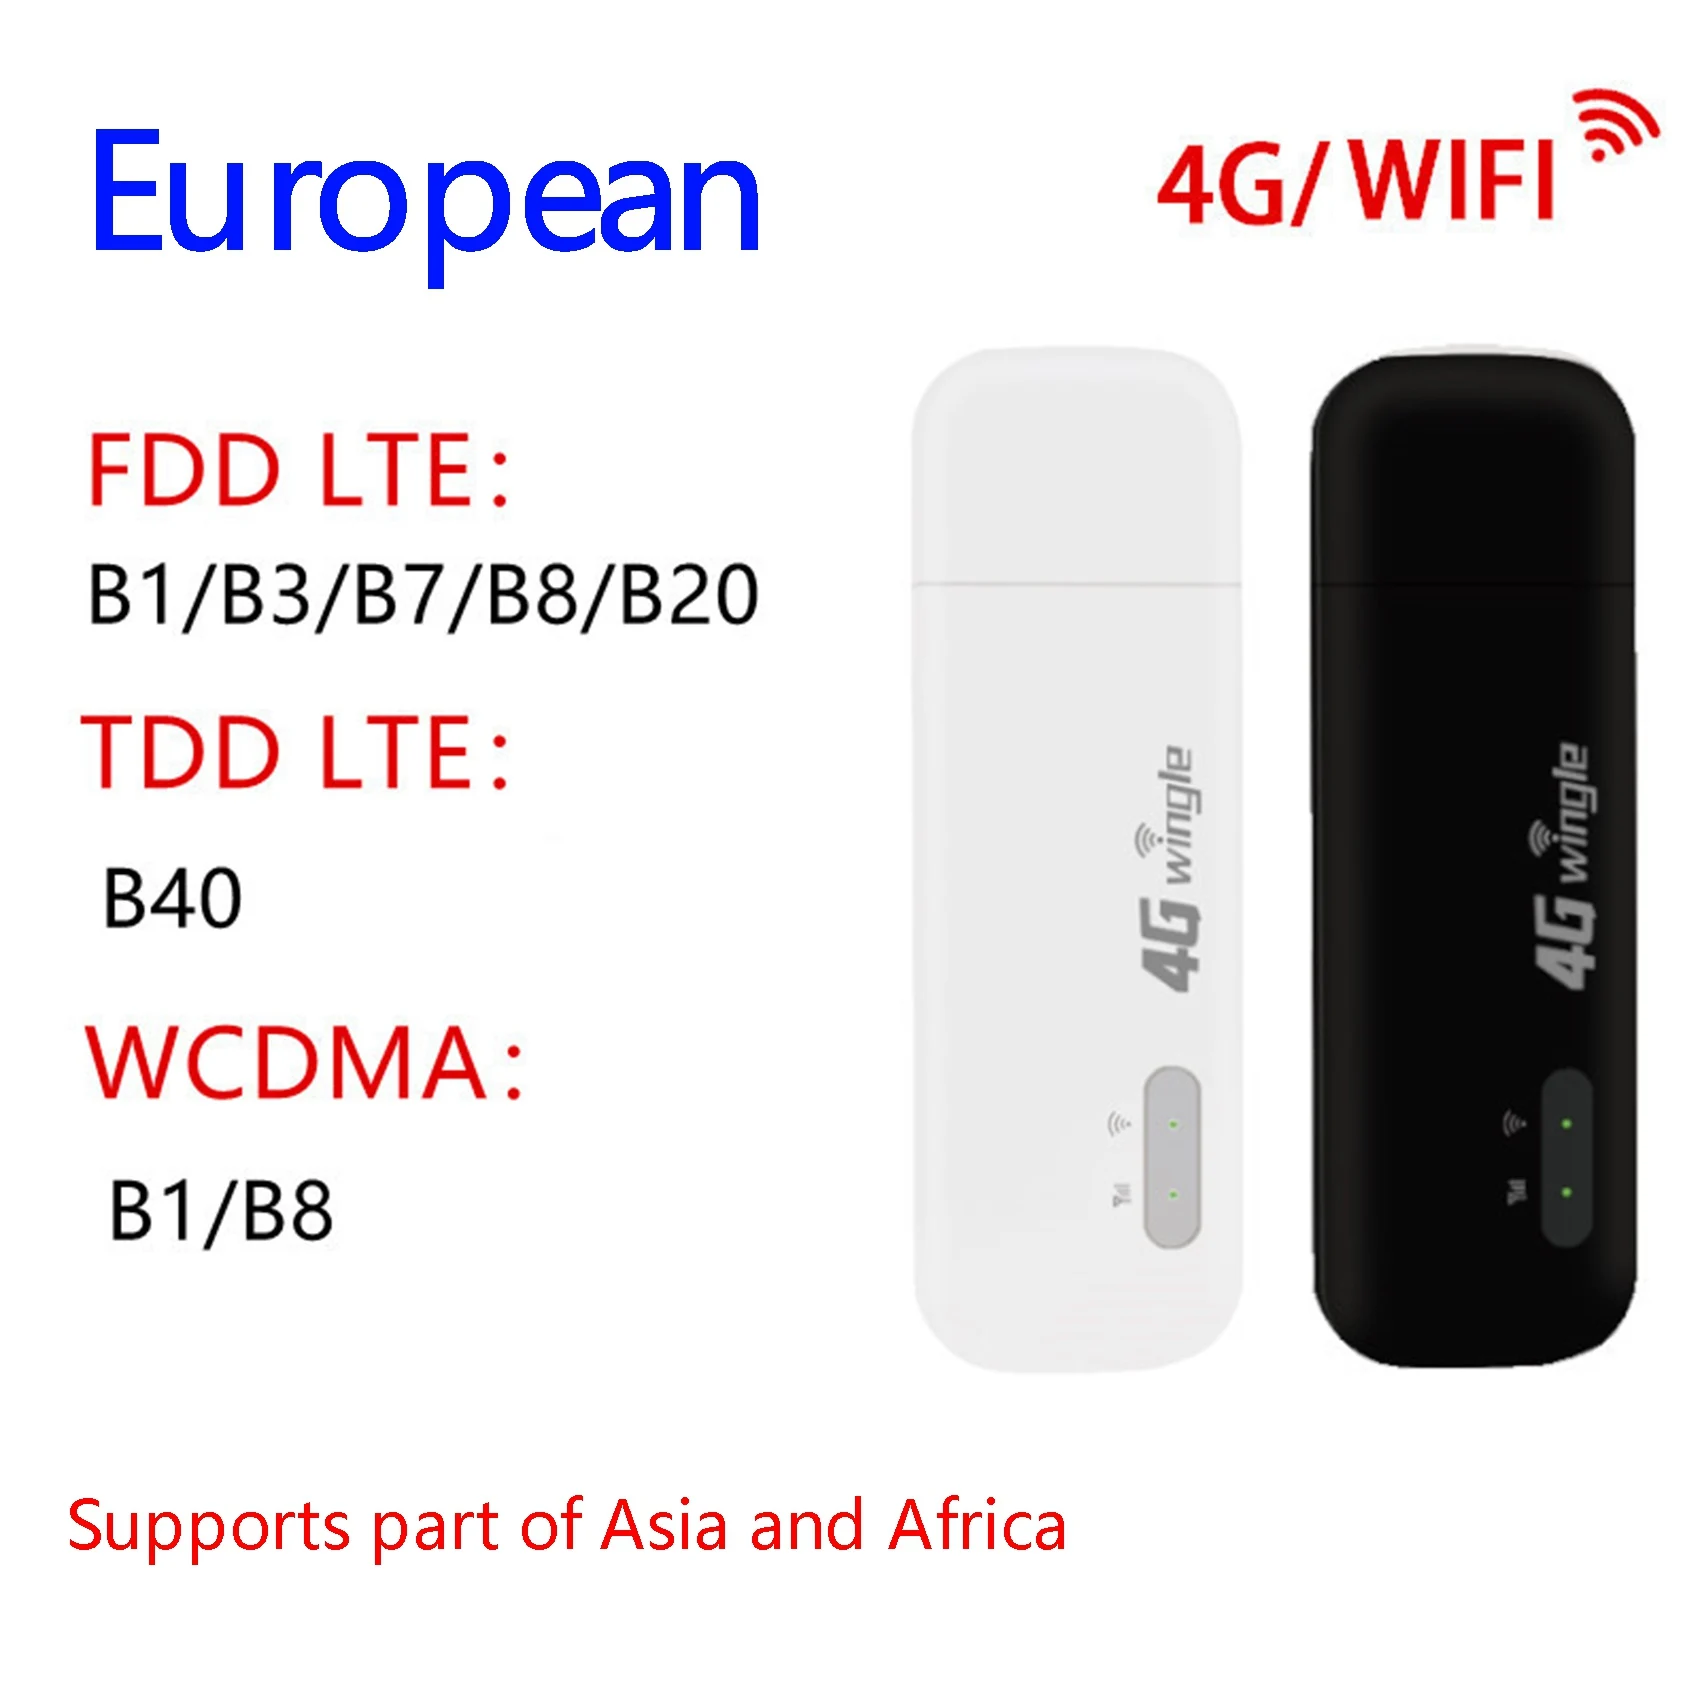 

4G WiFi Router USB Modem Mobile WiFi 150M USB WiFi Dongle for Wireless Hotspot with SIM Card Slot (White)